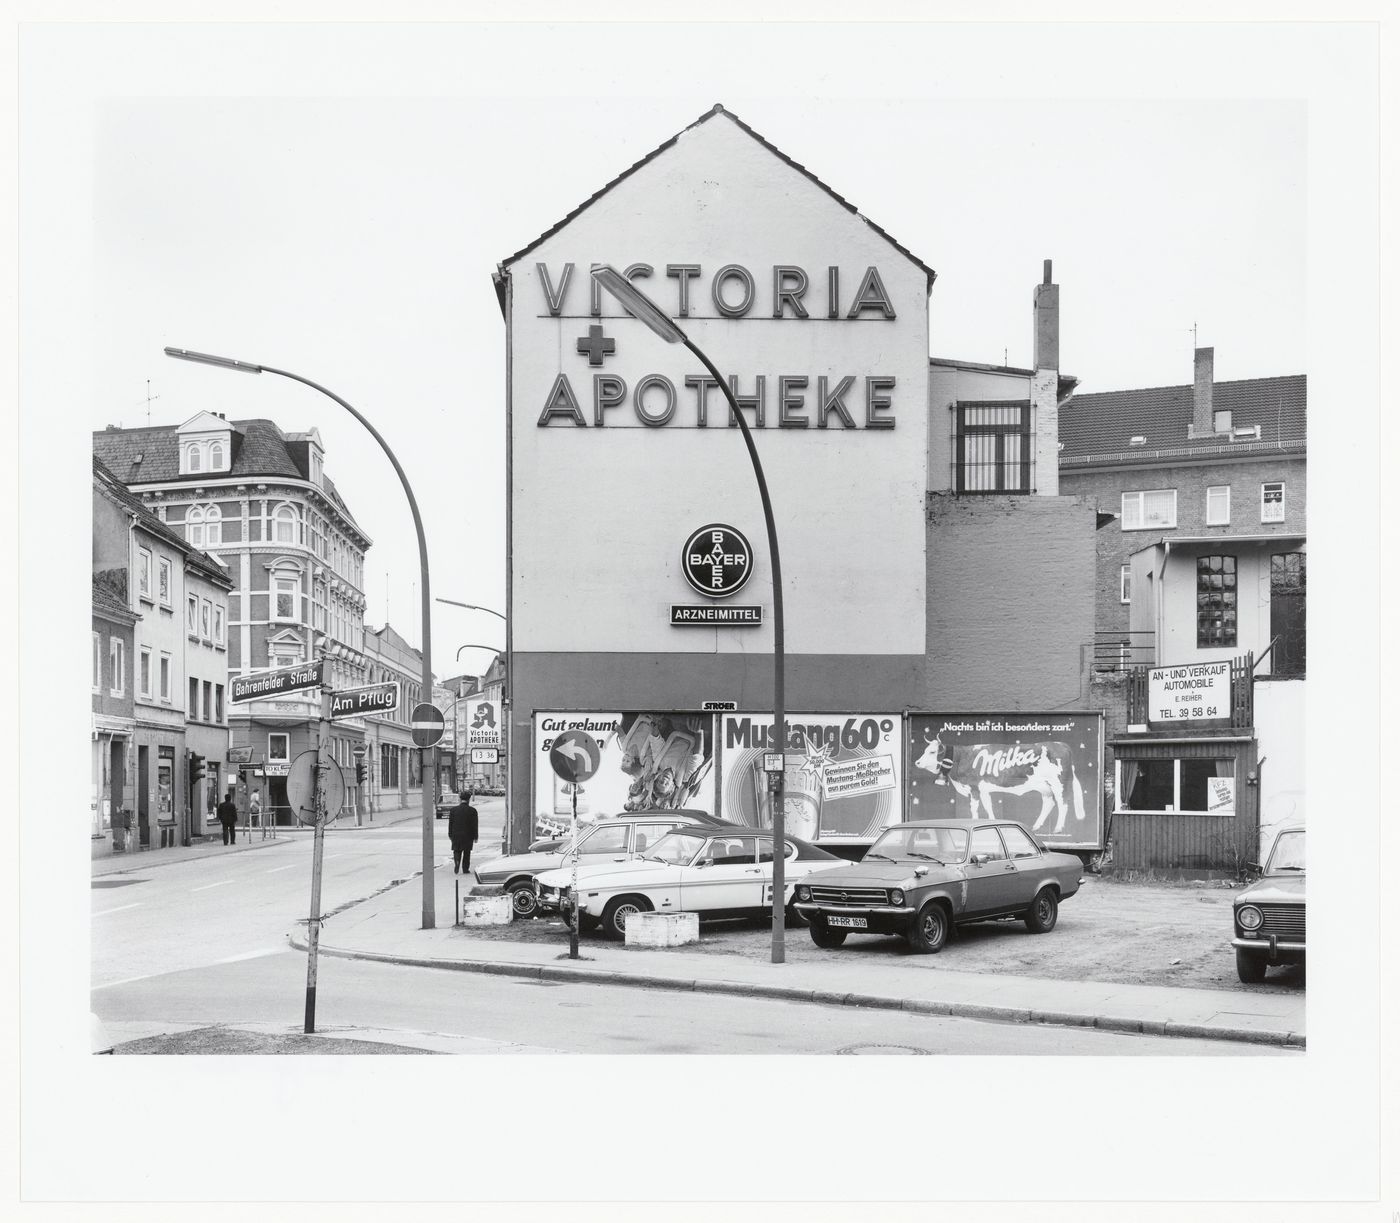 View of intersection of Bahrenfelder strasse and Am Pflug, with Victoria Apotheke at center, Hamburg, Germany